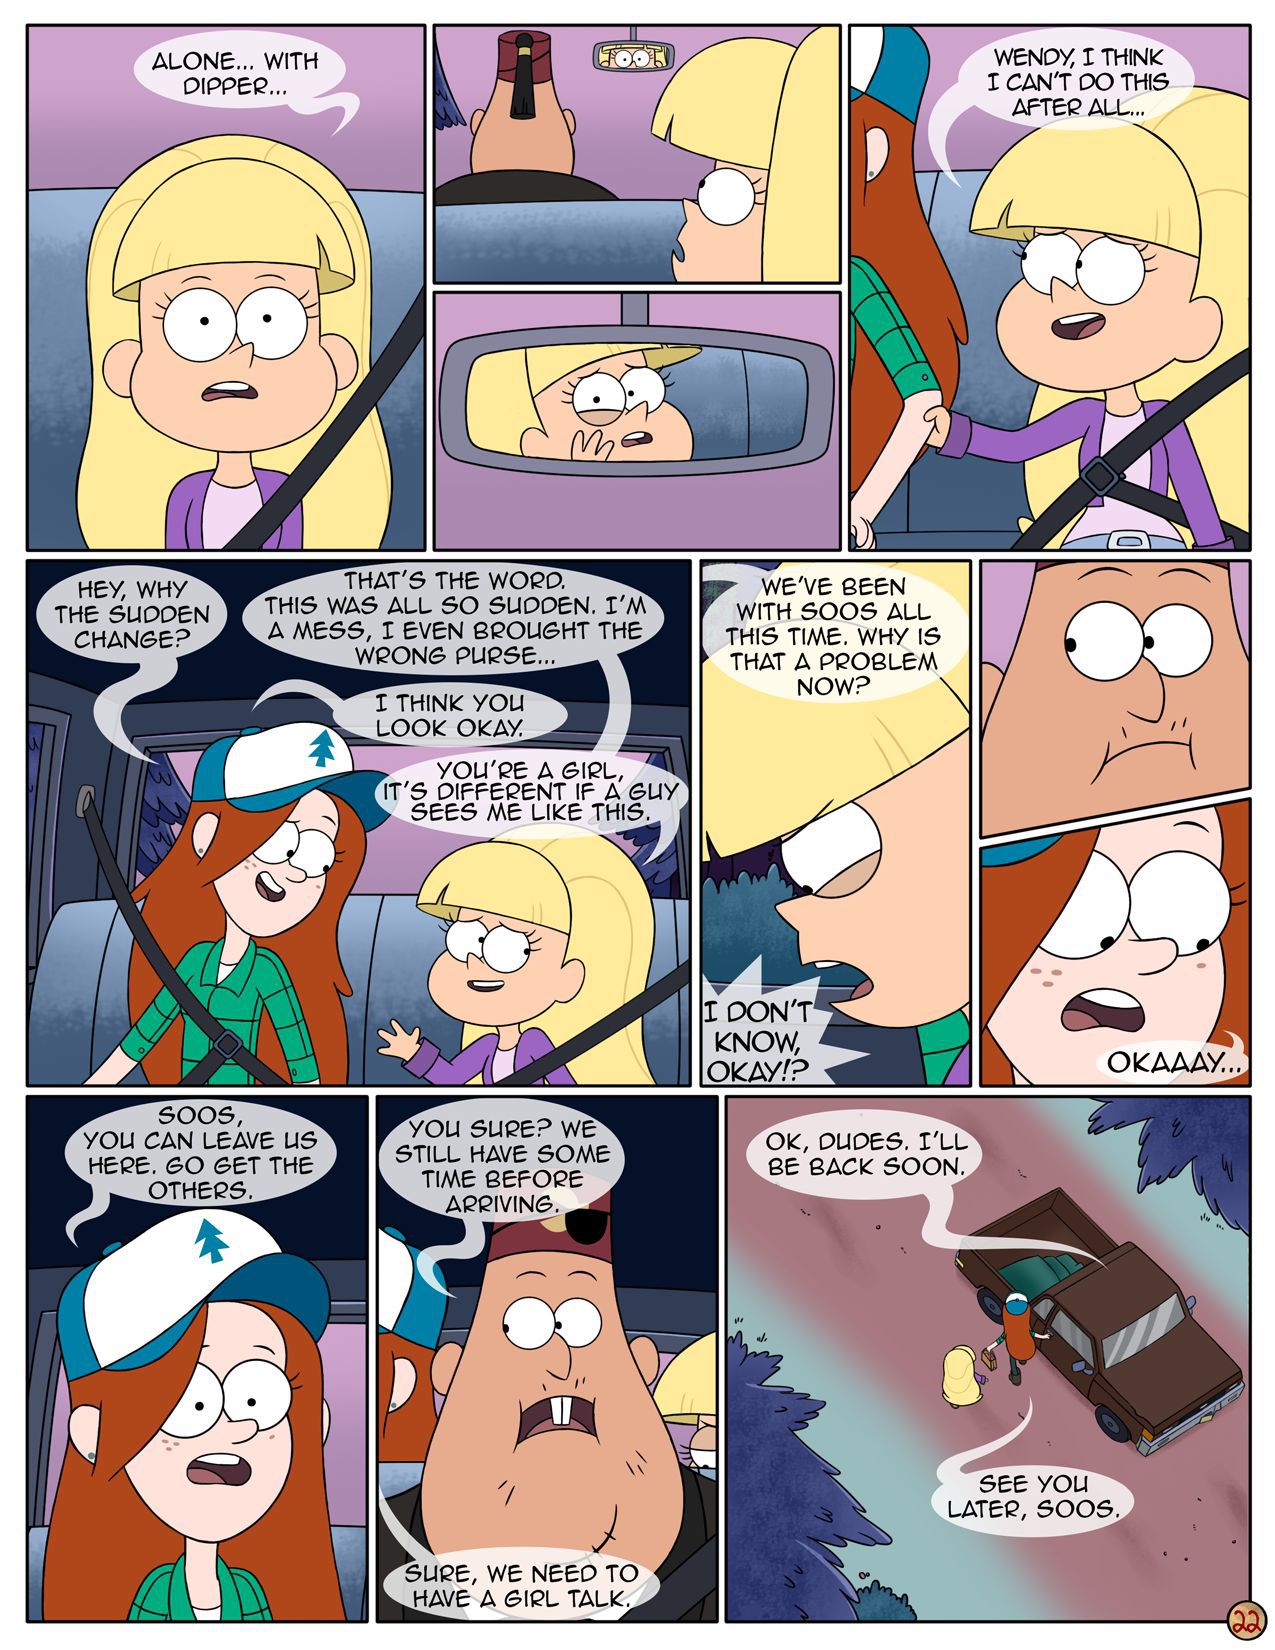 [Area] Next Summer (Gravity Falls) [Ongoing] 23